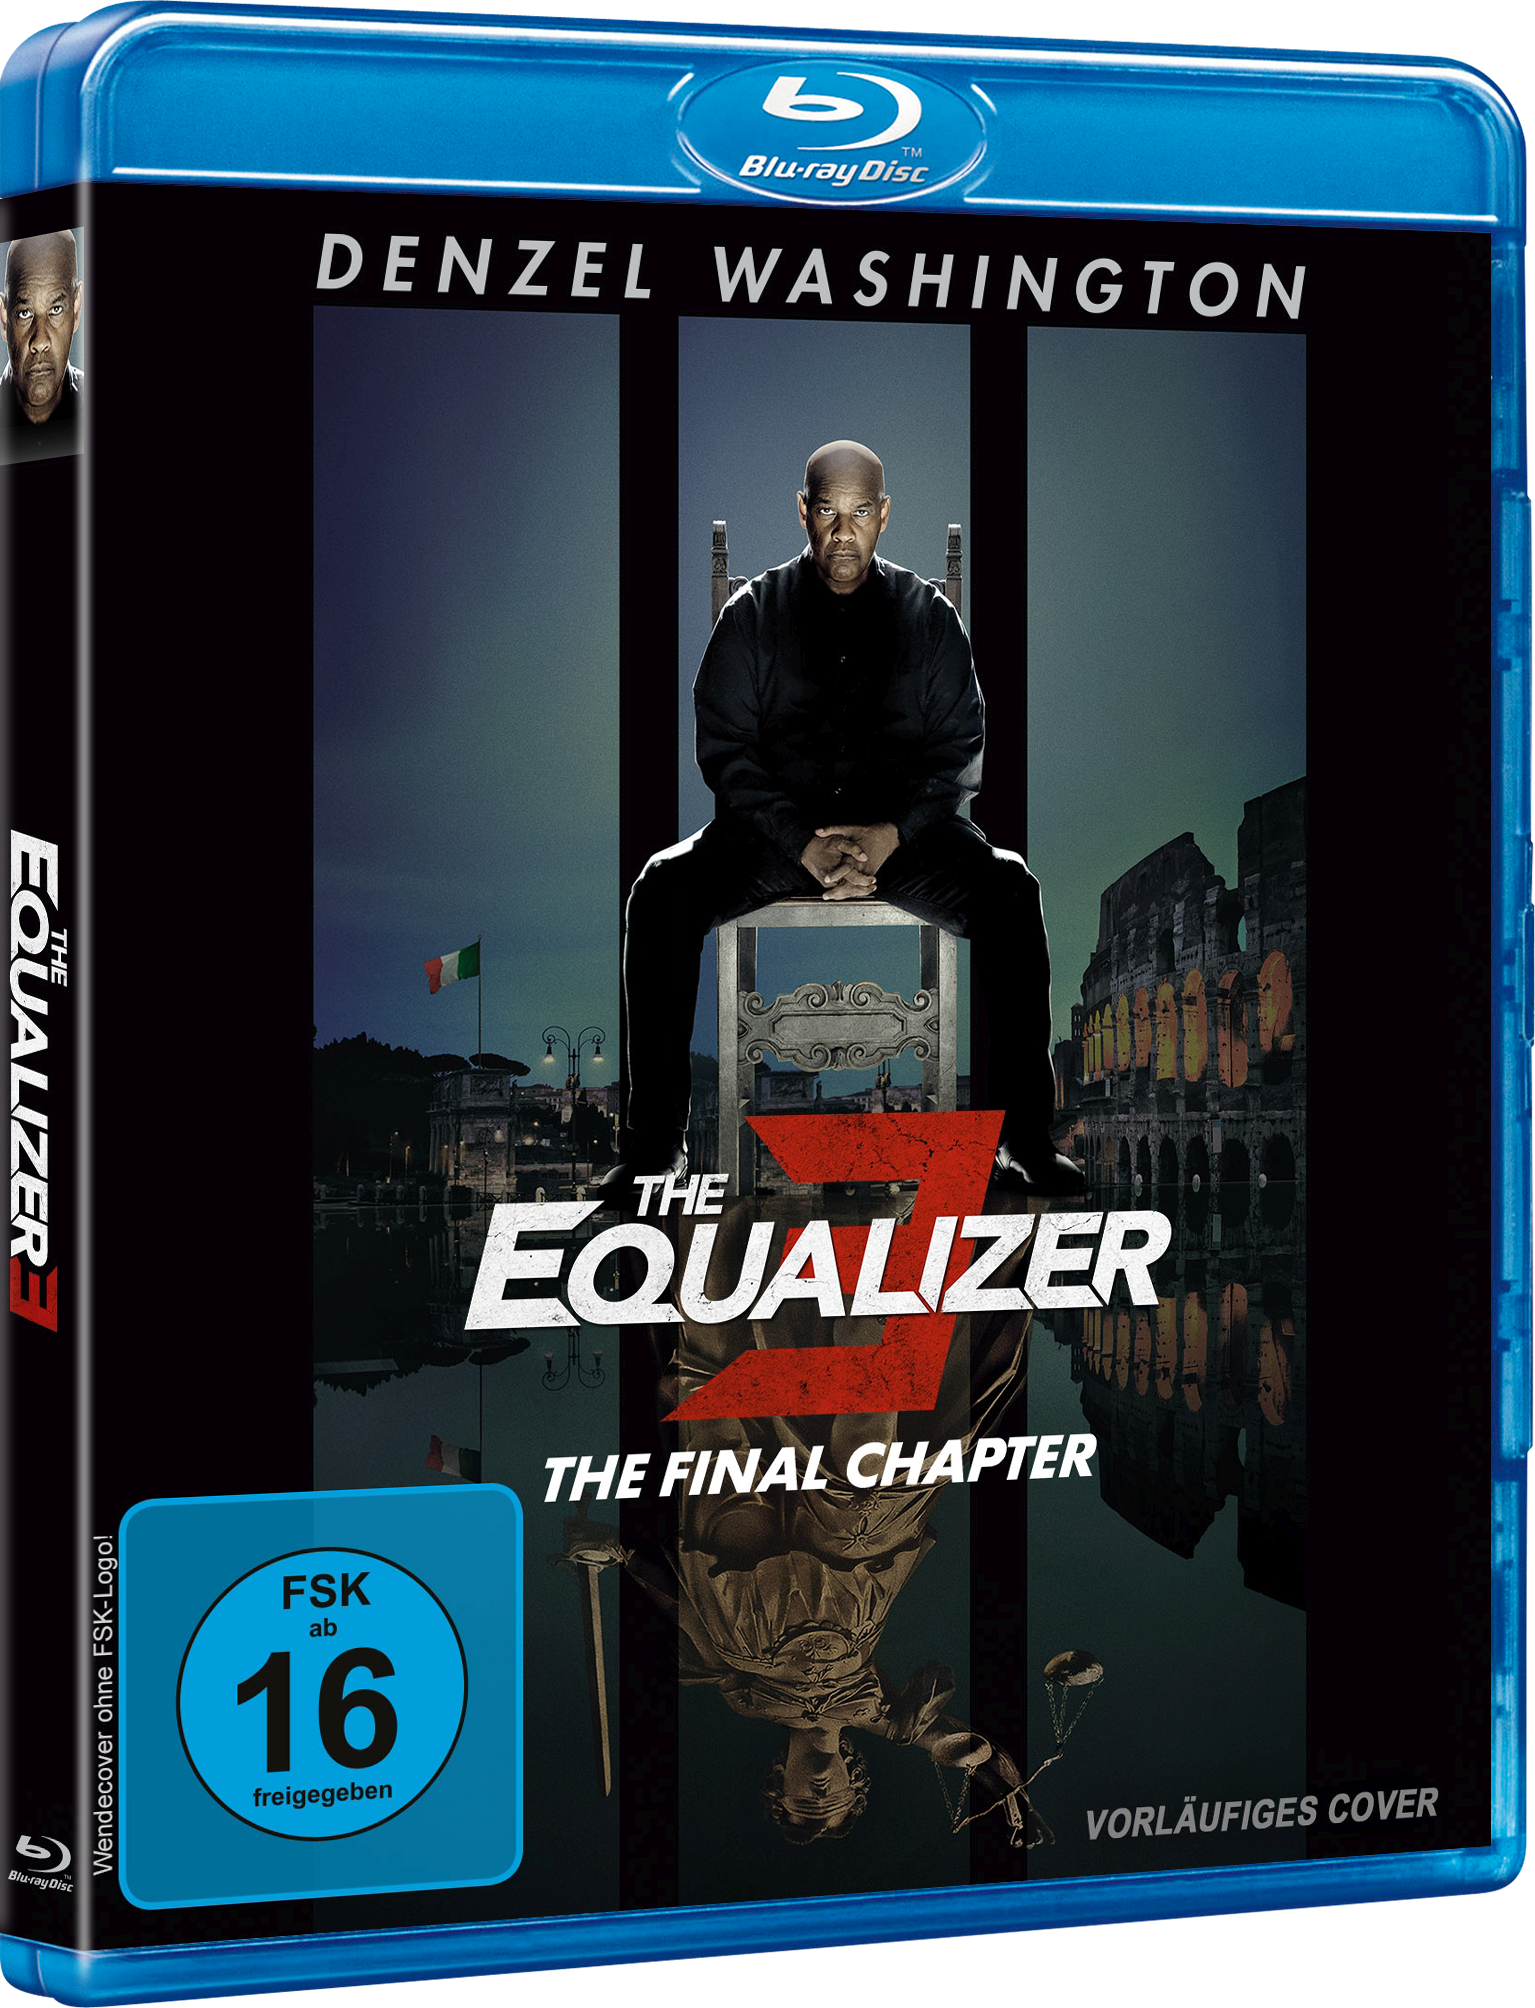 The Equalizer 3 - The Final Chapter (Blu-ray) Image 2